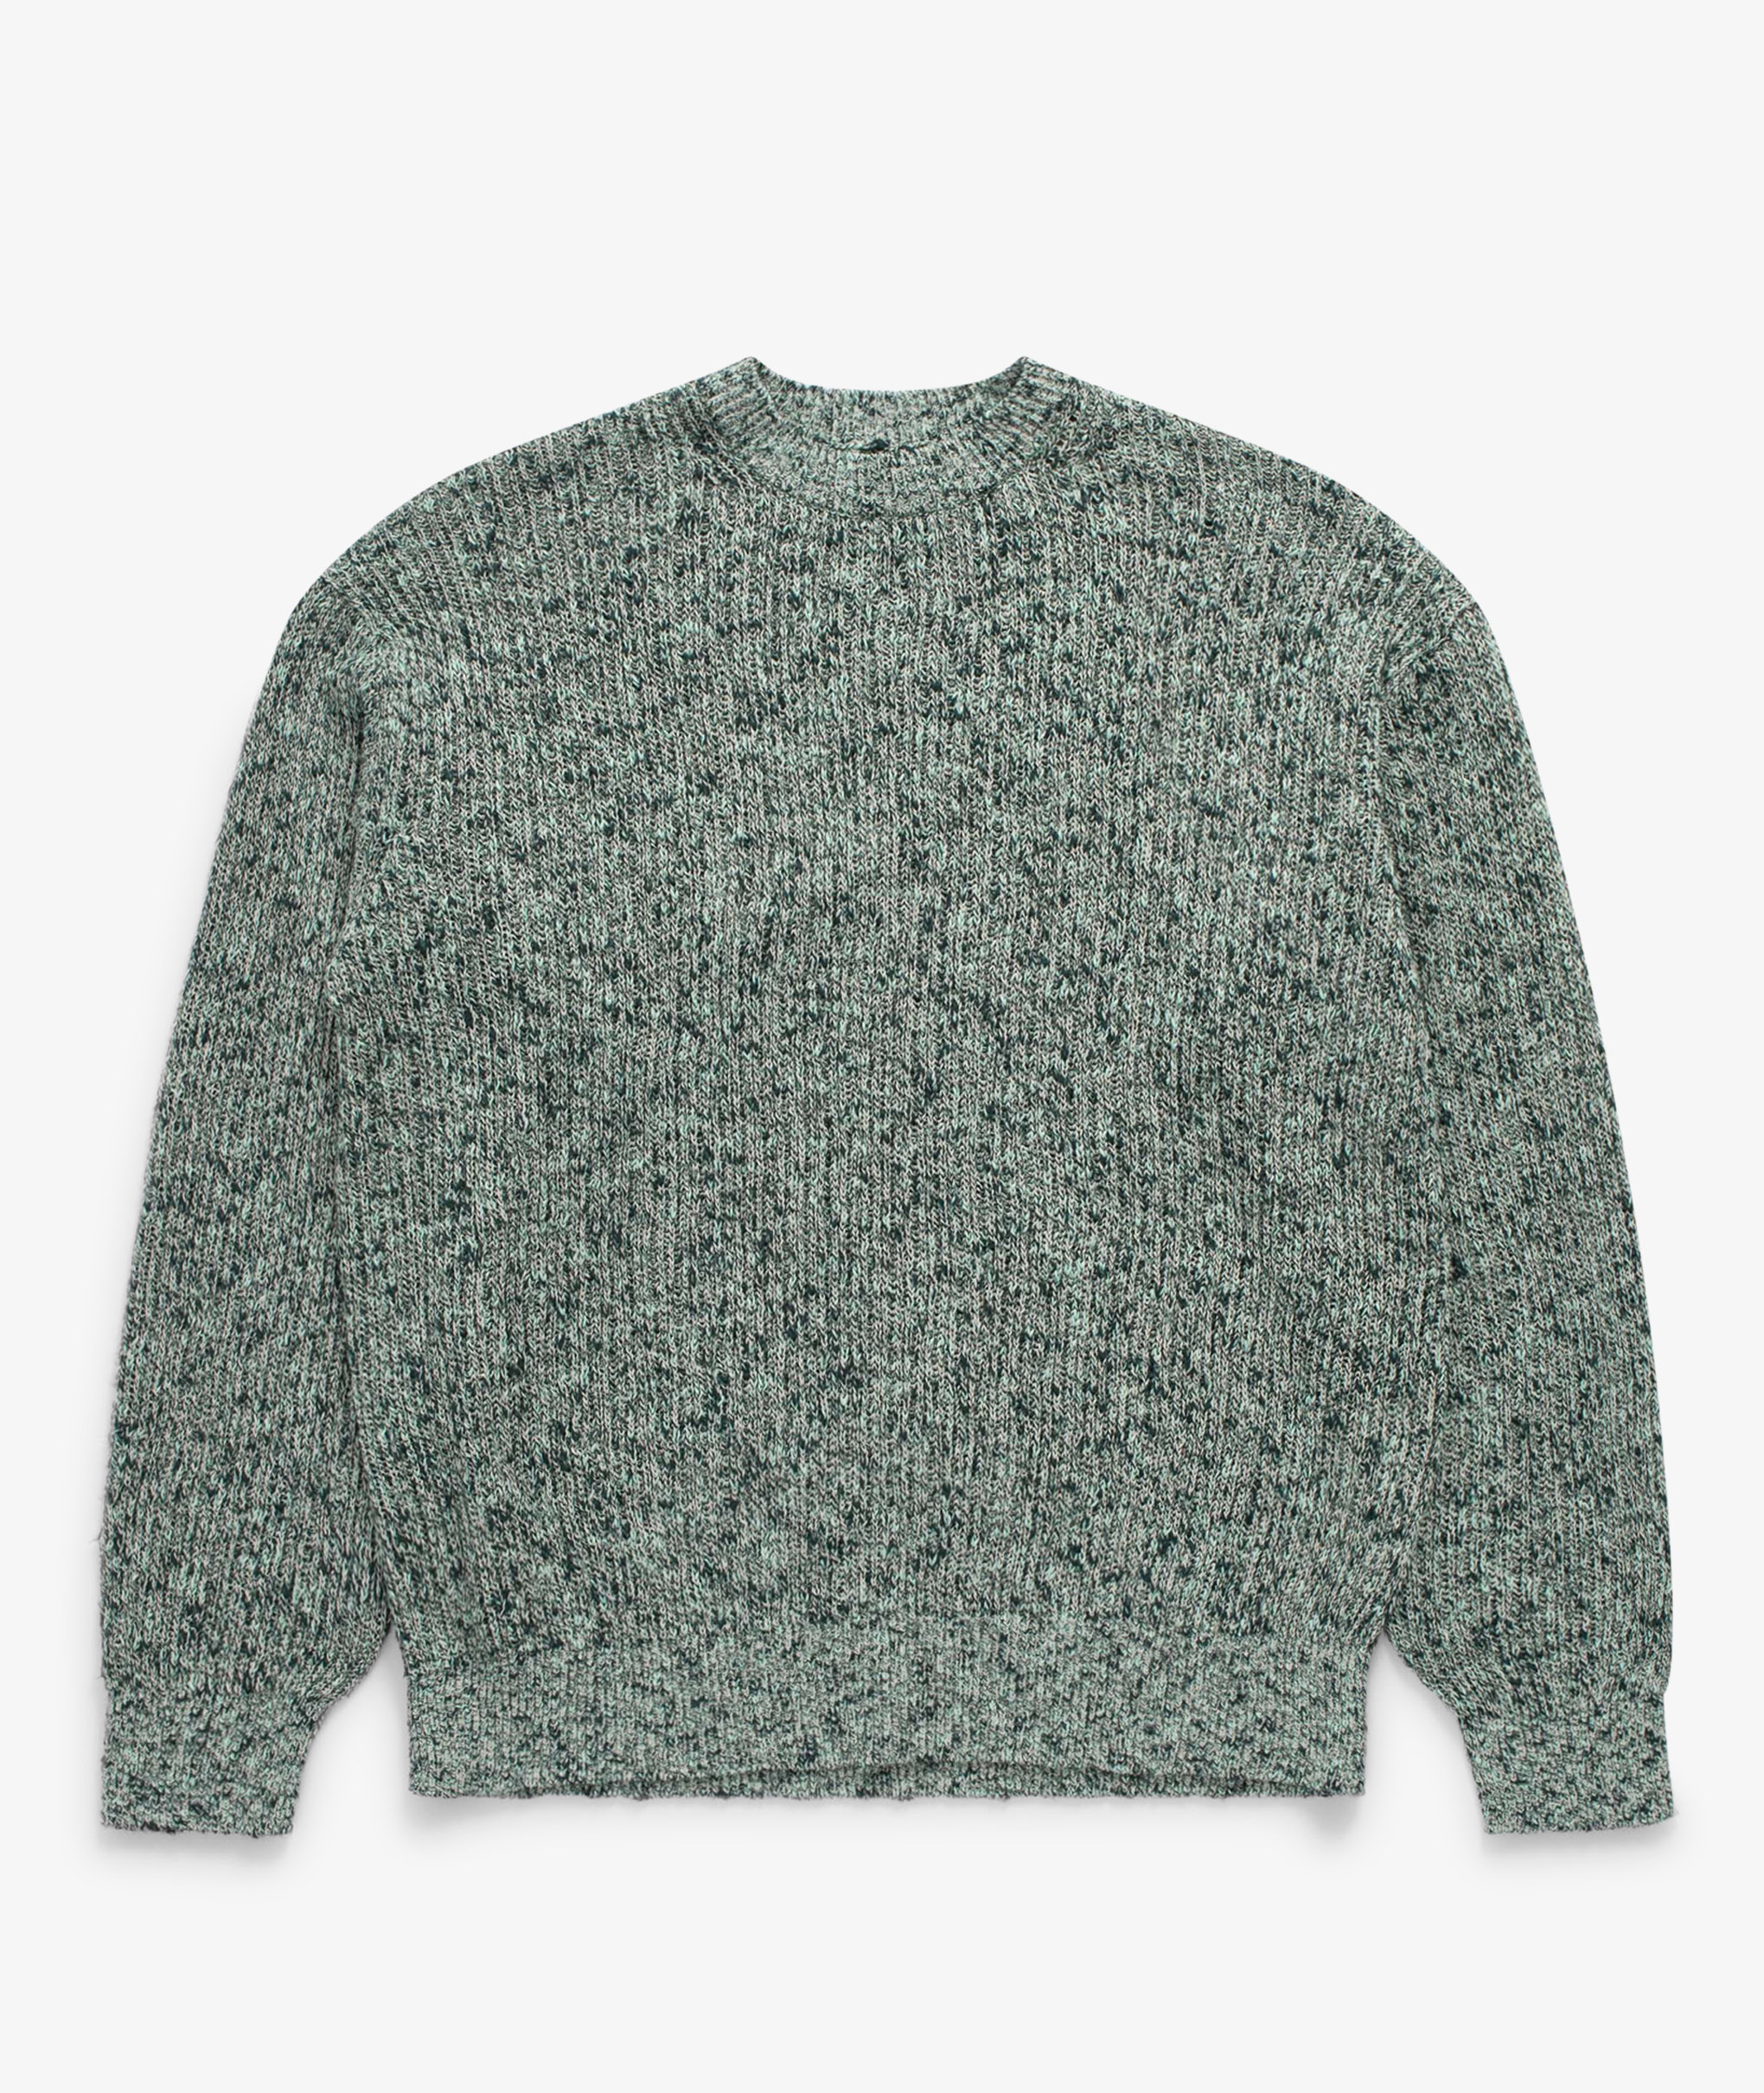 Norse Store | Shipping Worldwide - Auralee Mix Yarn Rib Knit Pullover ...